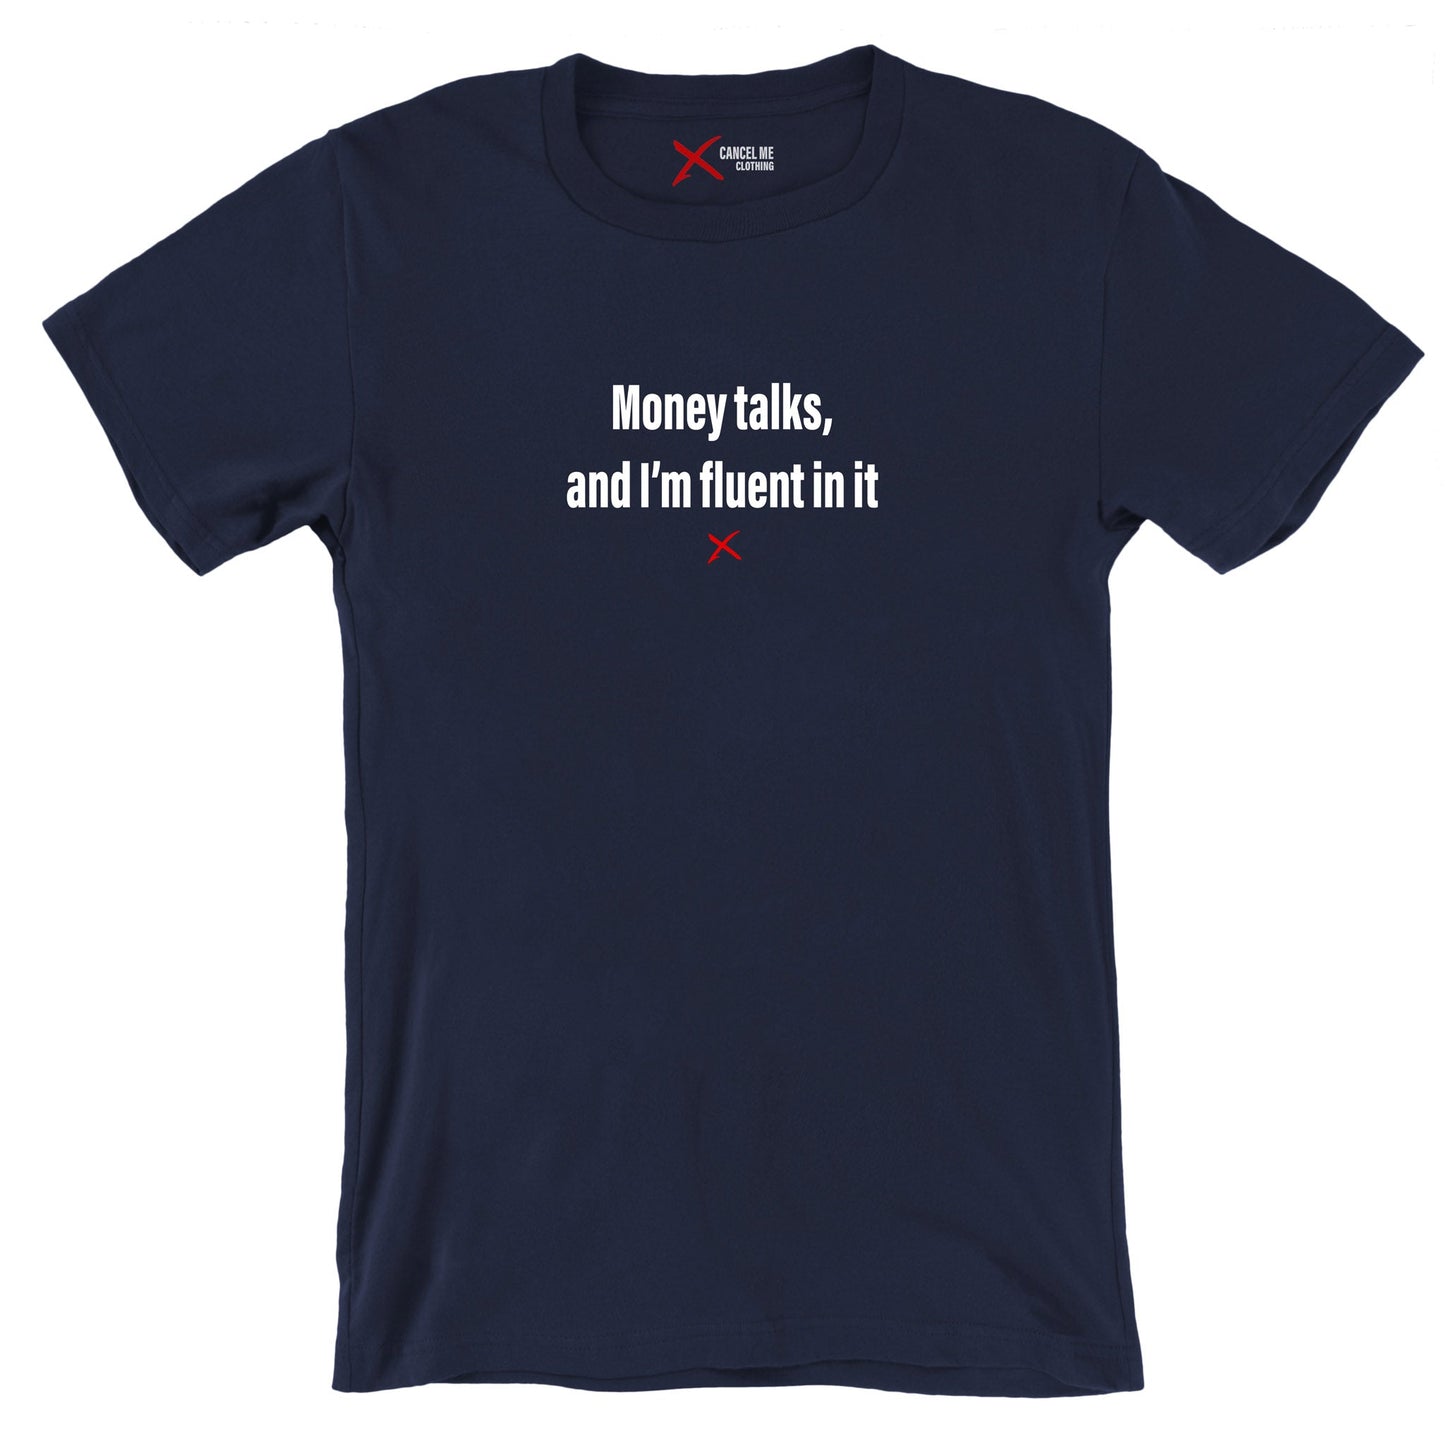 Money talks, and I'm fluent in it - Shirt